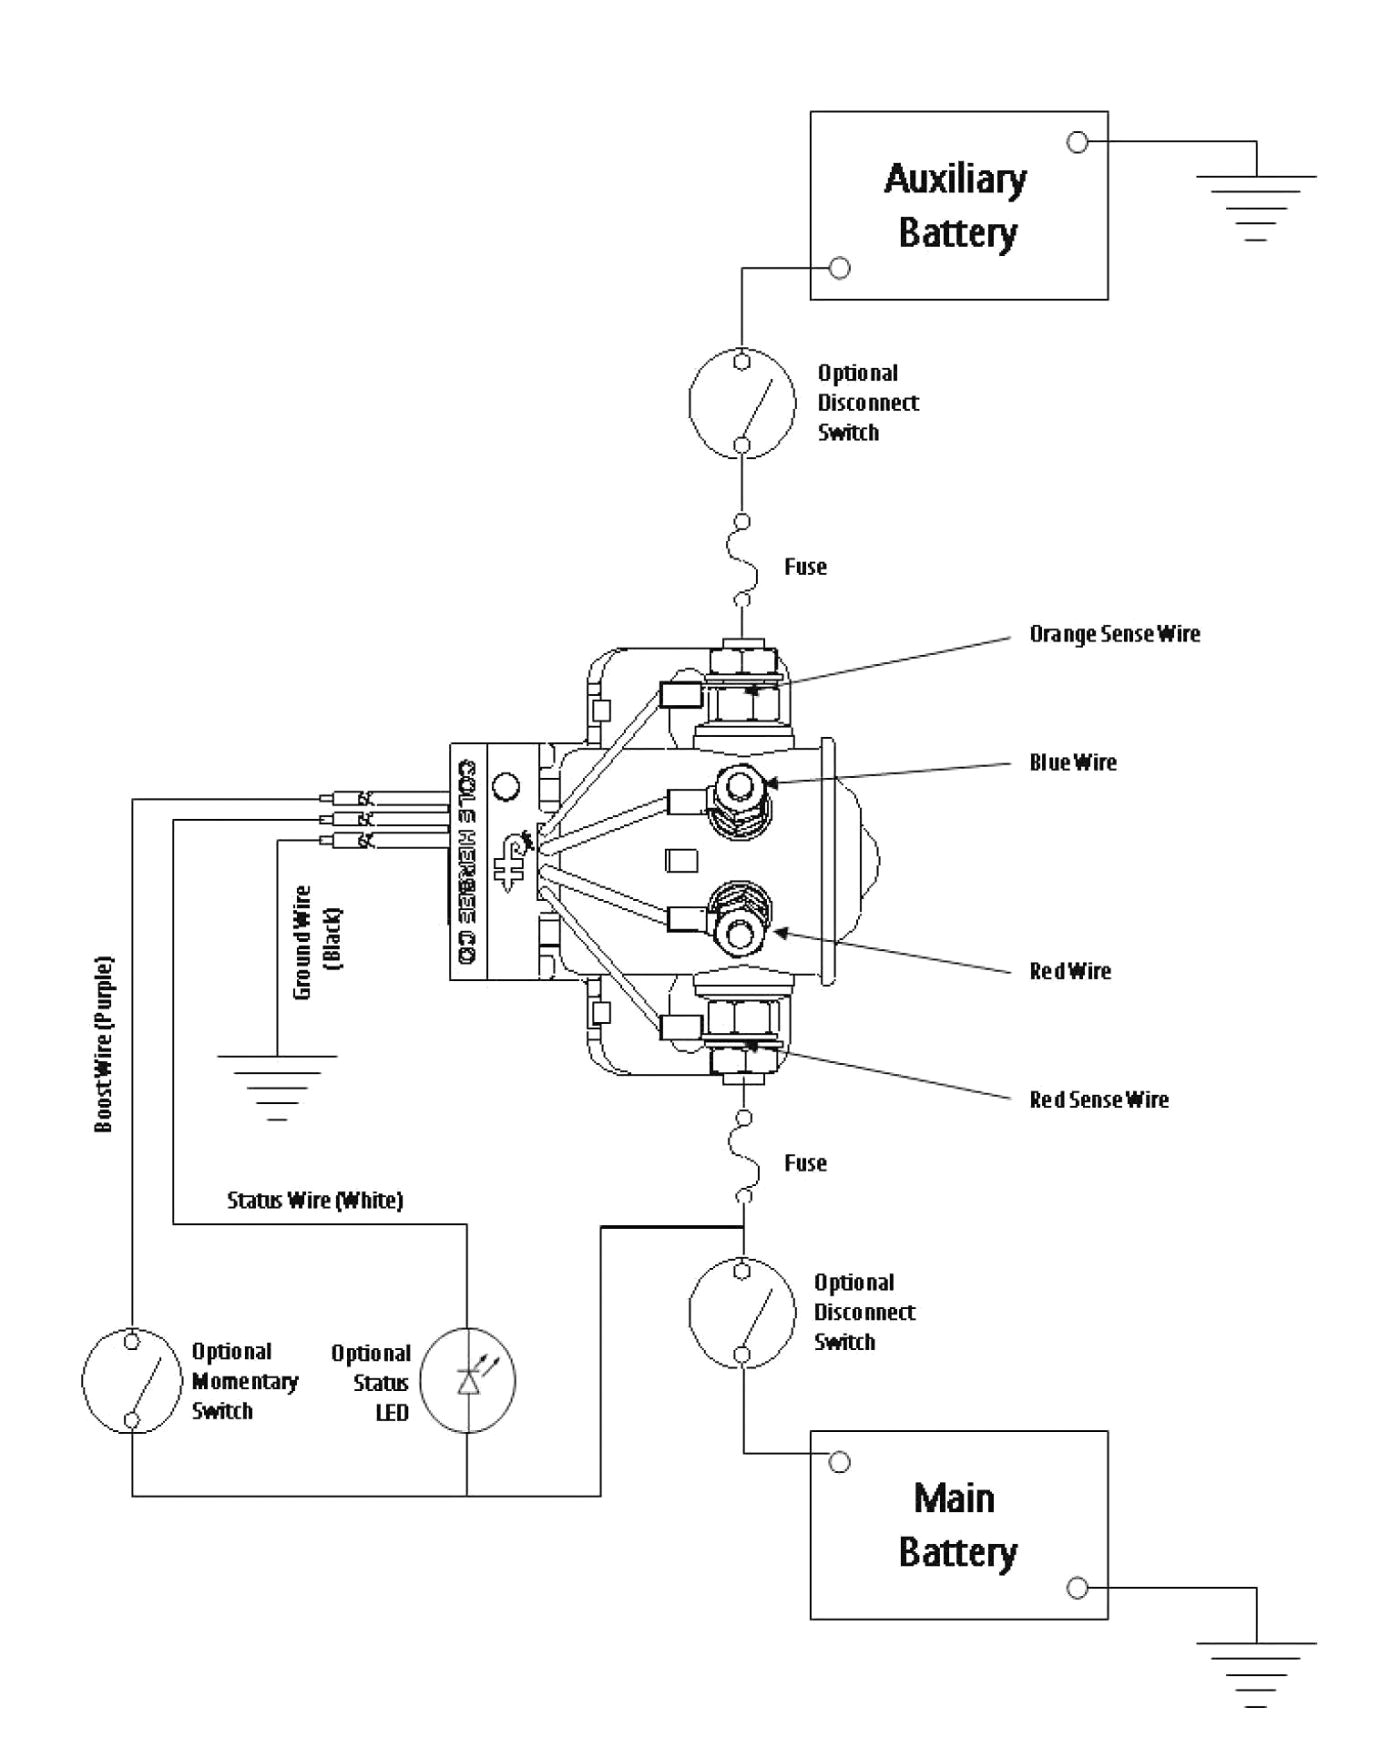 awesome battery isolator wiring diagram